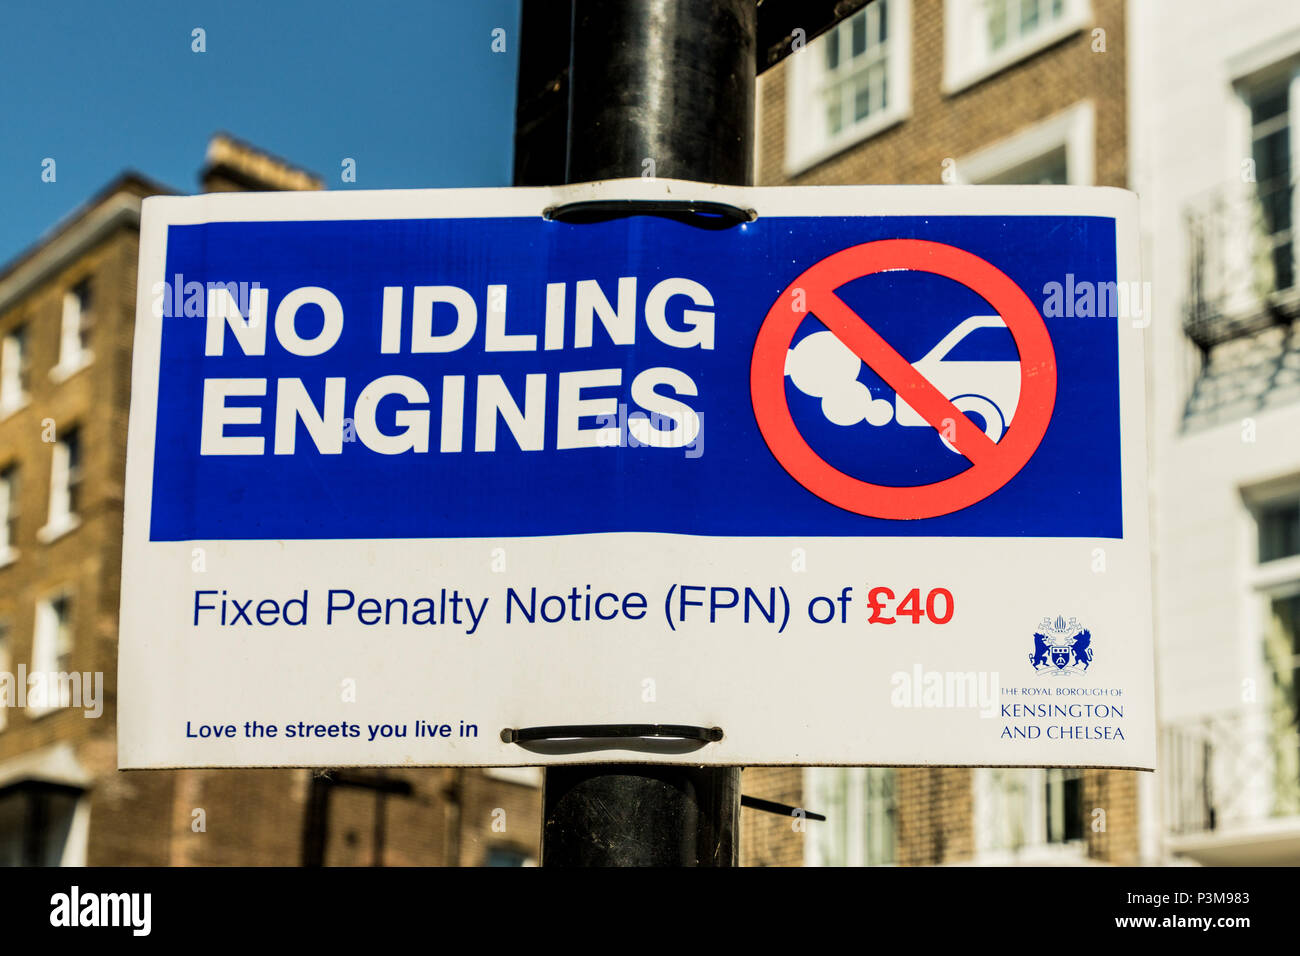 No idling engines sign Stock Photo